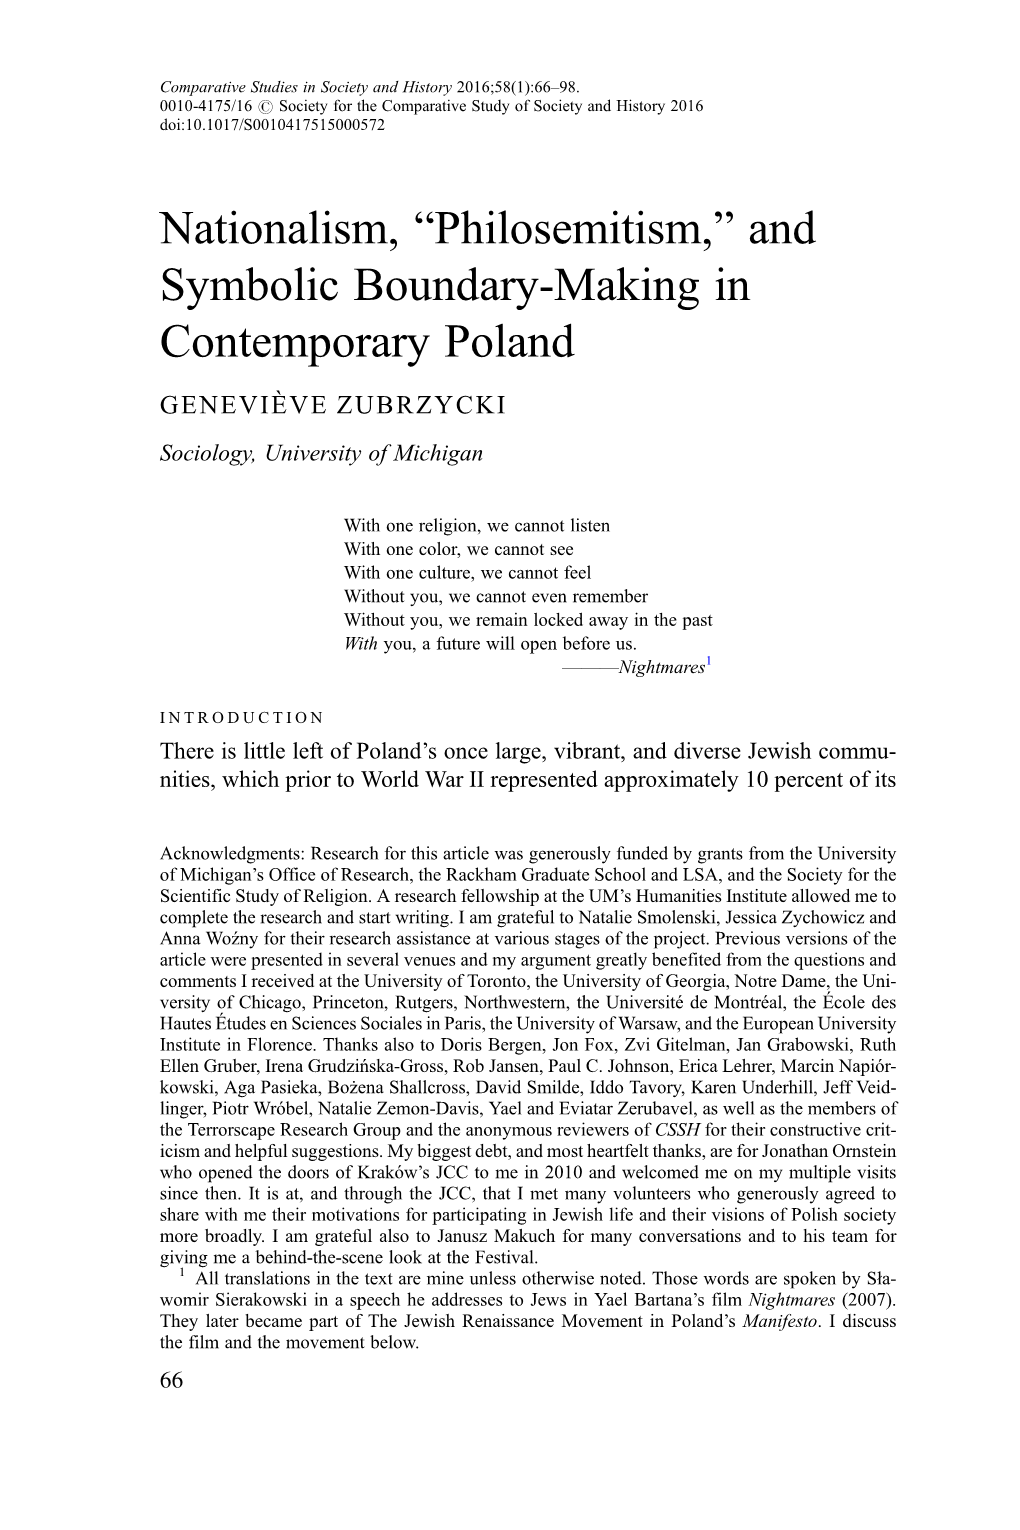 Nationalism, “Philosemitism,” and Symbolic Boundary-Making in Contemporary Poland